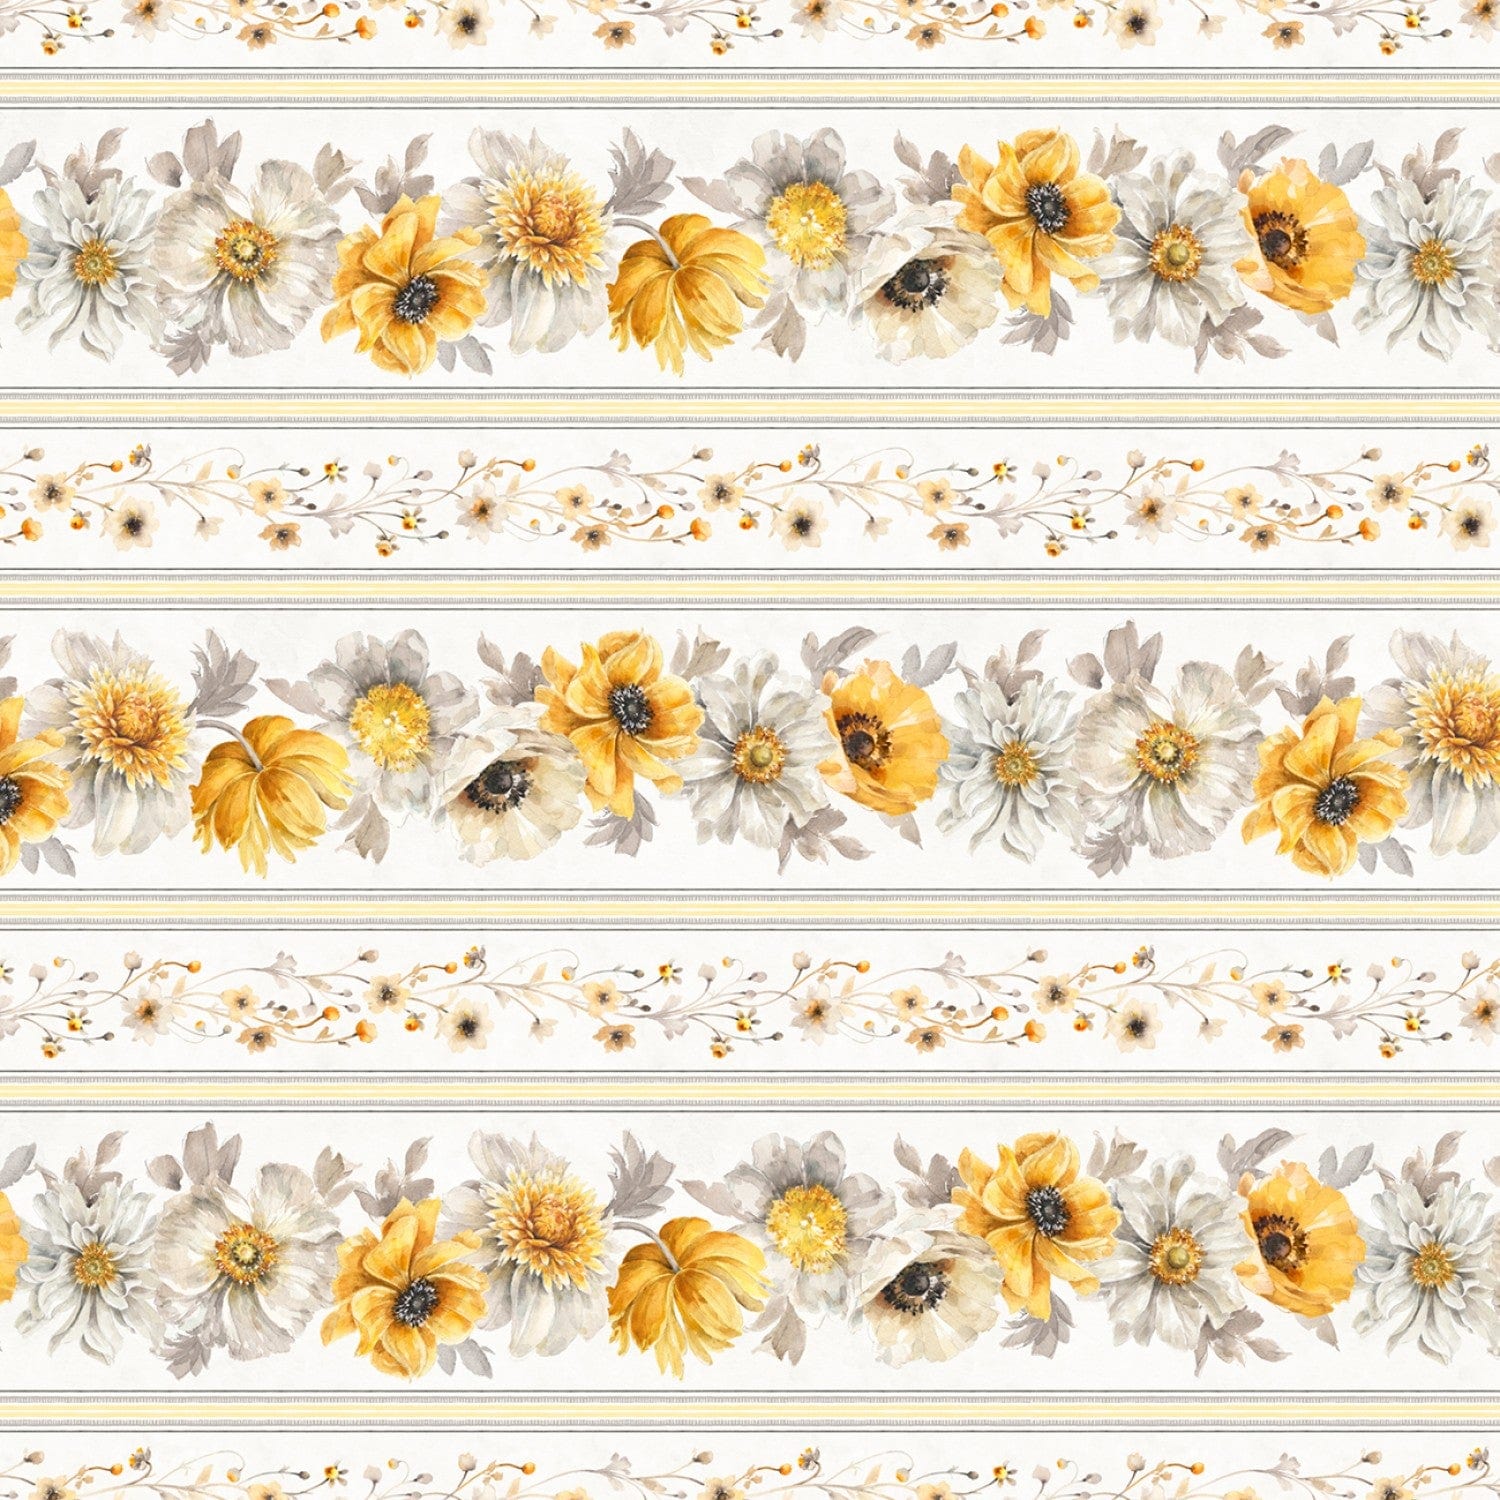 Multi Fields of Gold Repeating Stripe - 86497-195 - Fields of Gold - Wilmington Prints - Flower Prints